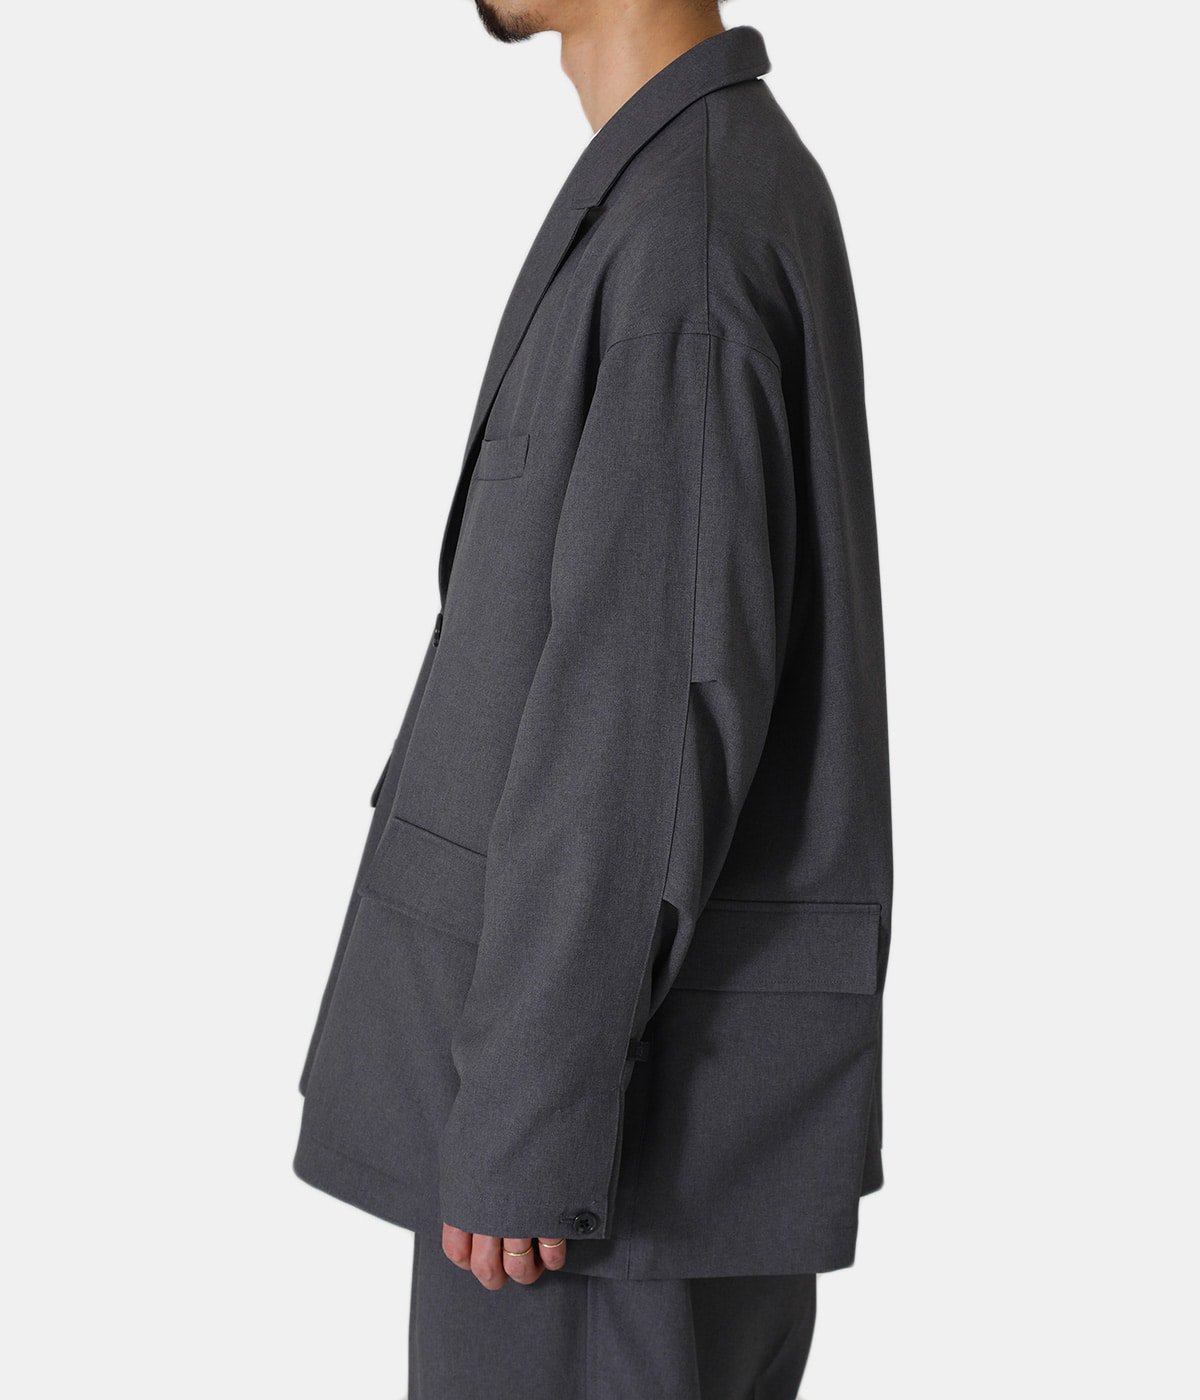 Tech Double-Breasted Jacket